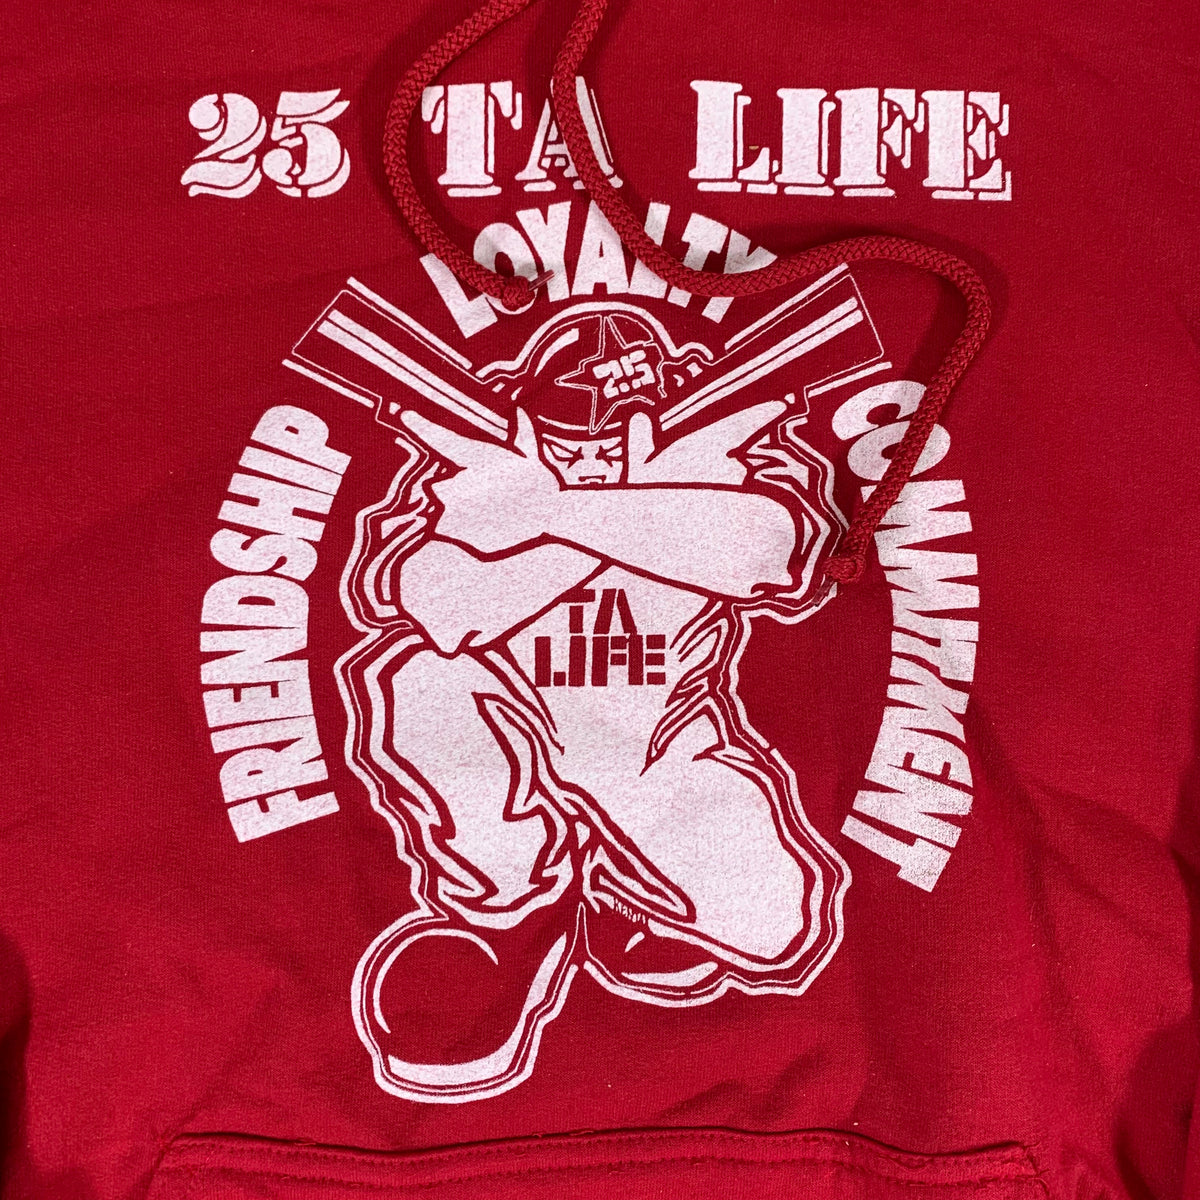 Vintage 25 Ta Life &quot;Friendship Loyalty Commitment&quot; Pullover Hoodie